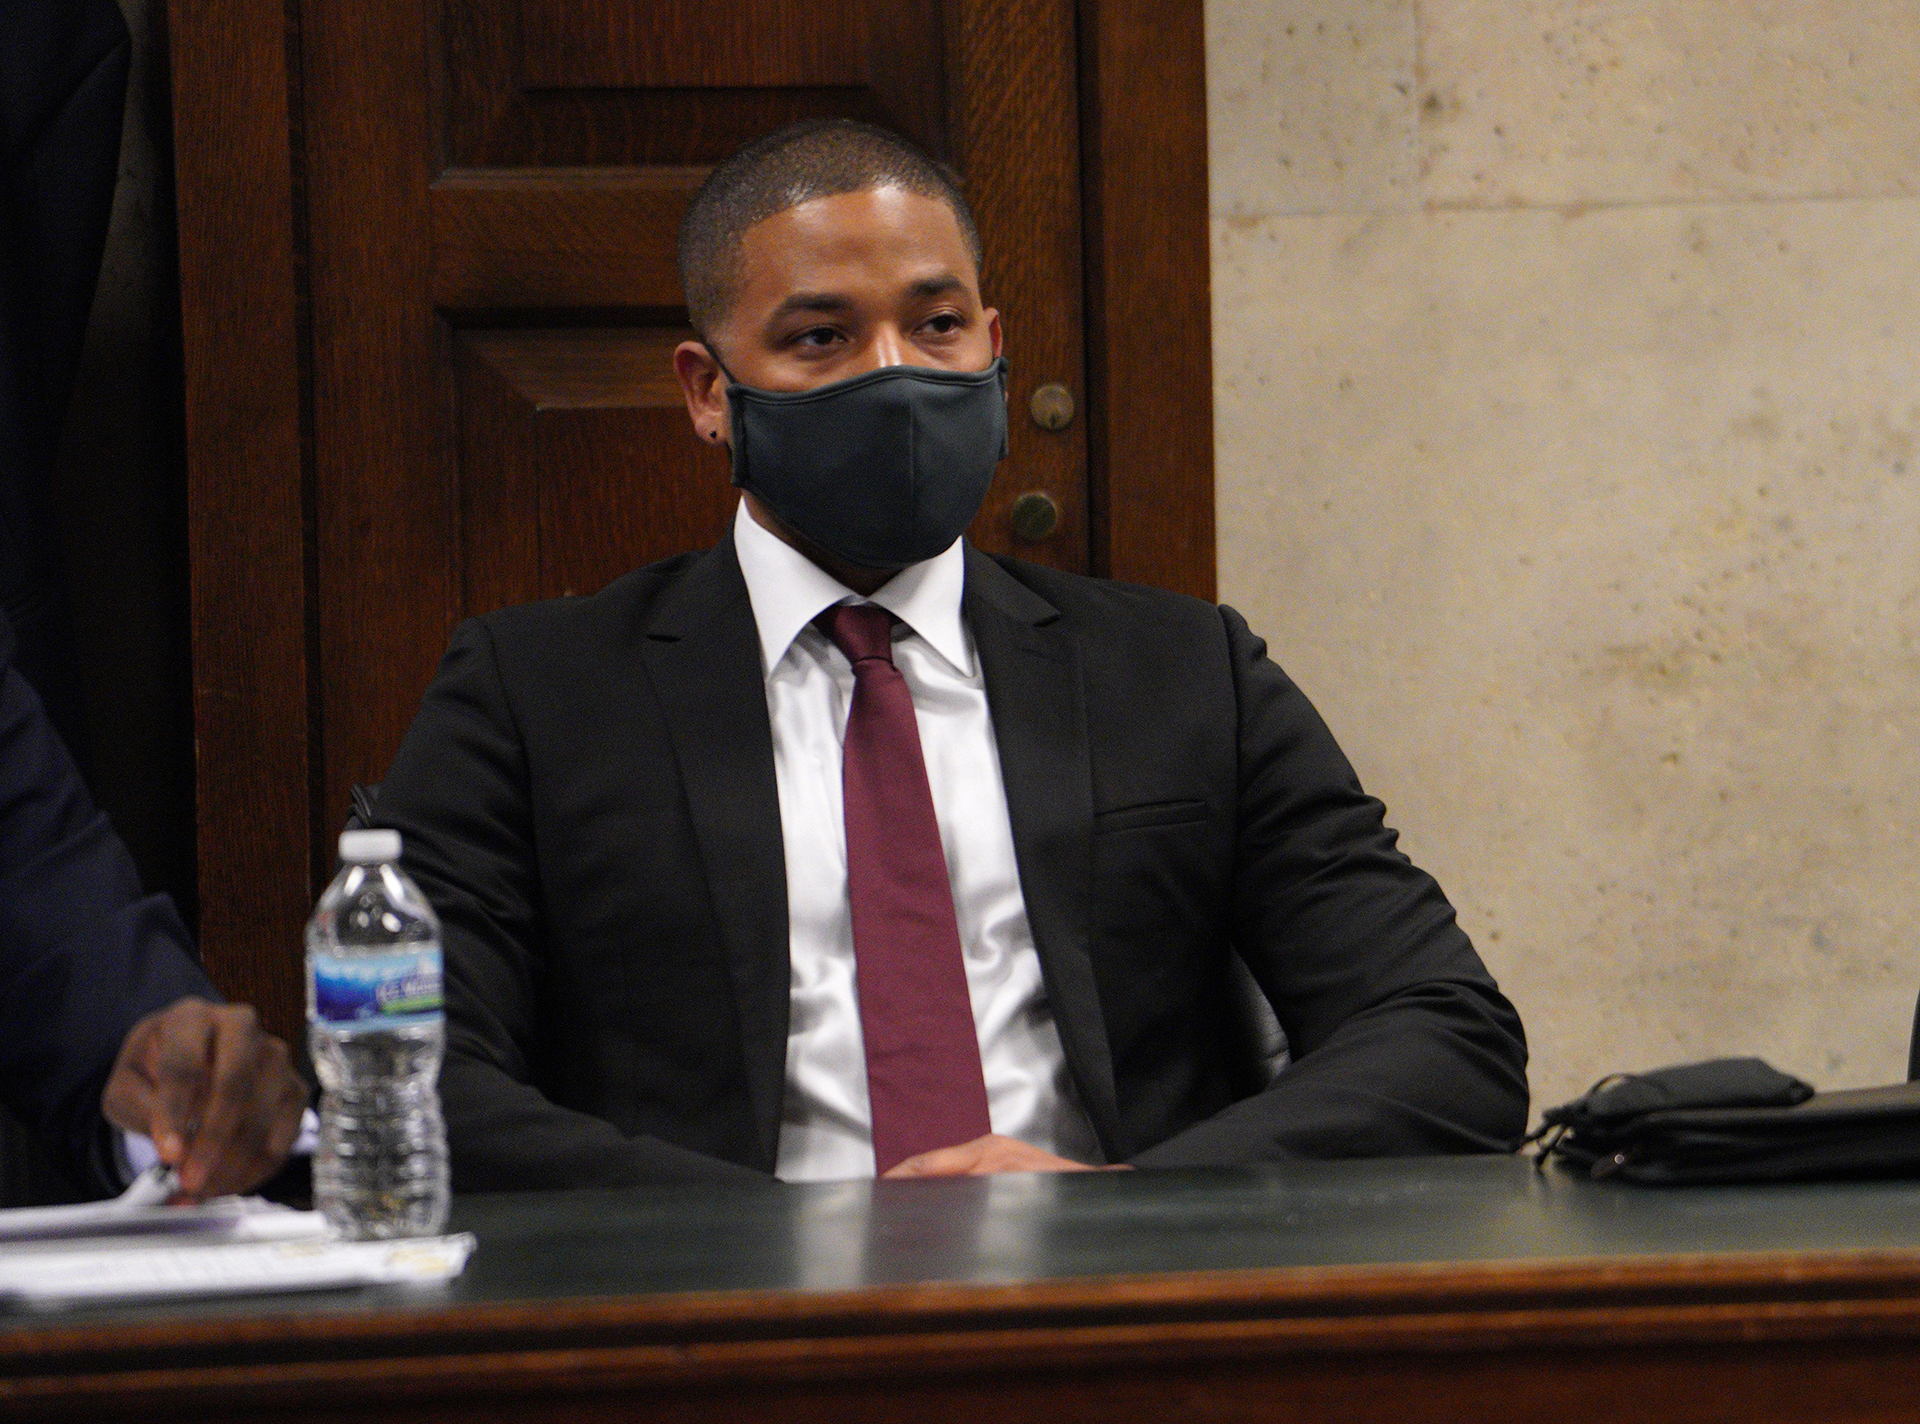 Jussie Smollett appears at his sentencing hearing at the Leighton Criminal Court Building